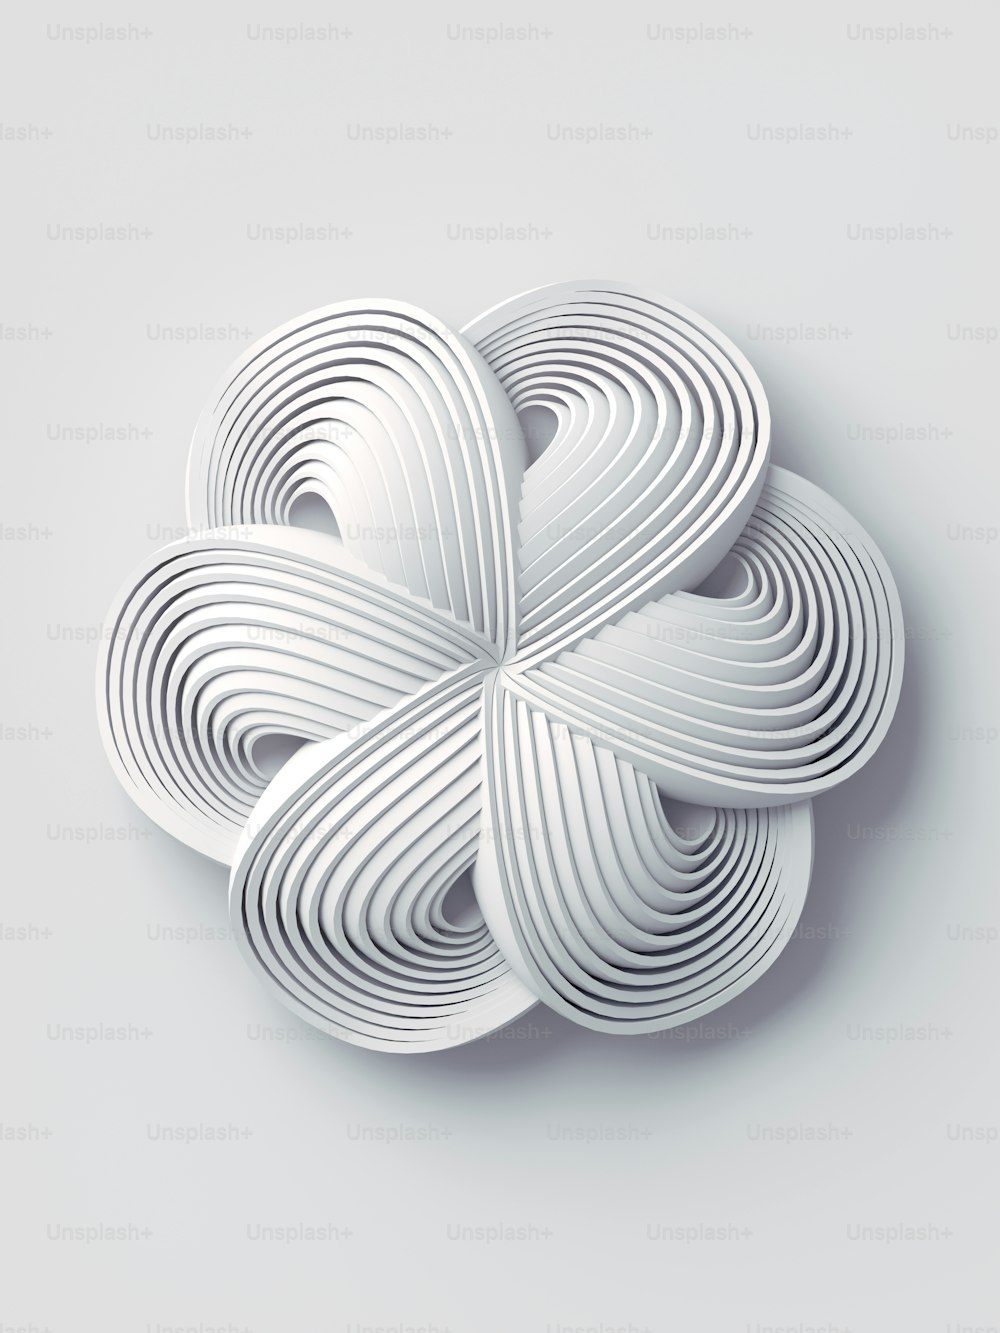 Trendy template for paper design. Minimal icon of stylized white flower. Modern geometric pattern. Abstract 3d rendering art background. Digital illustration